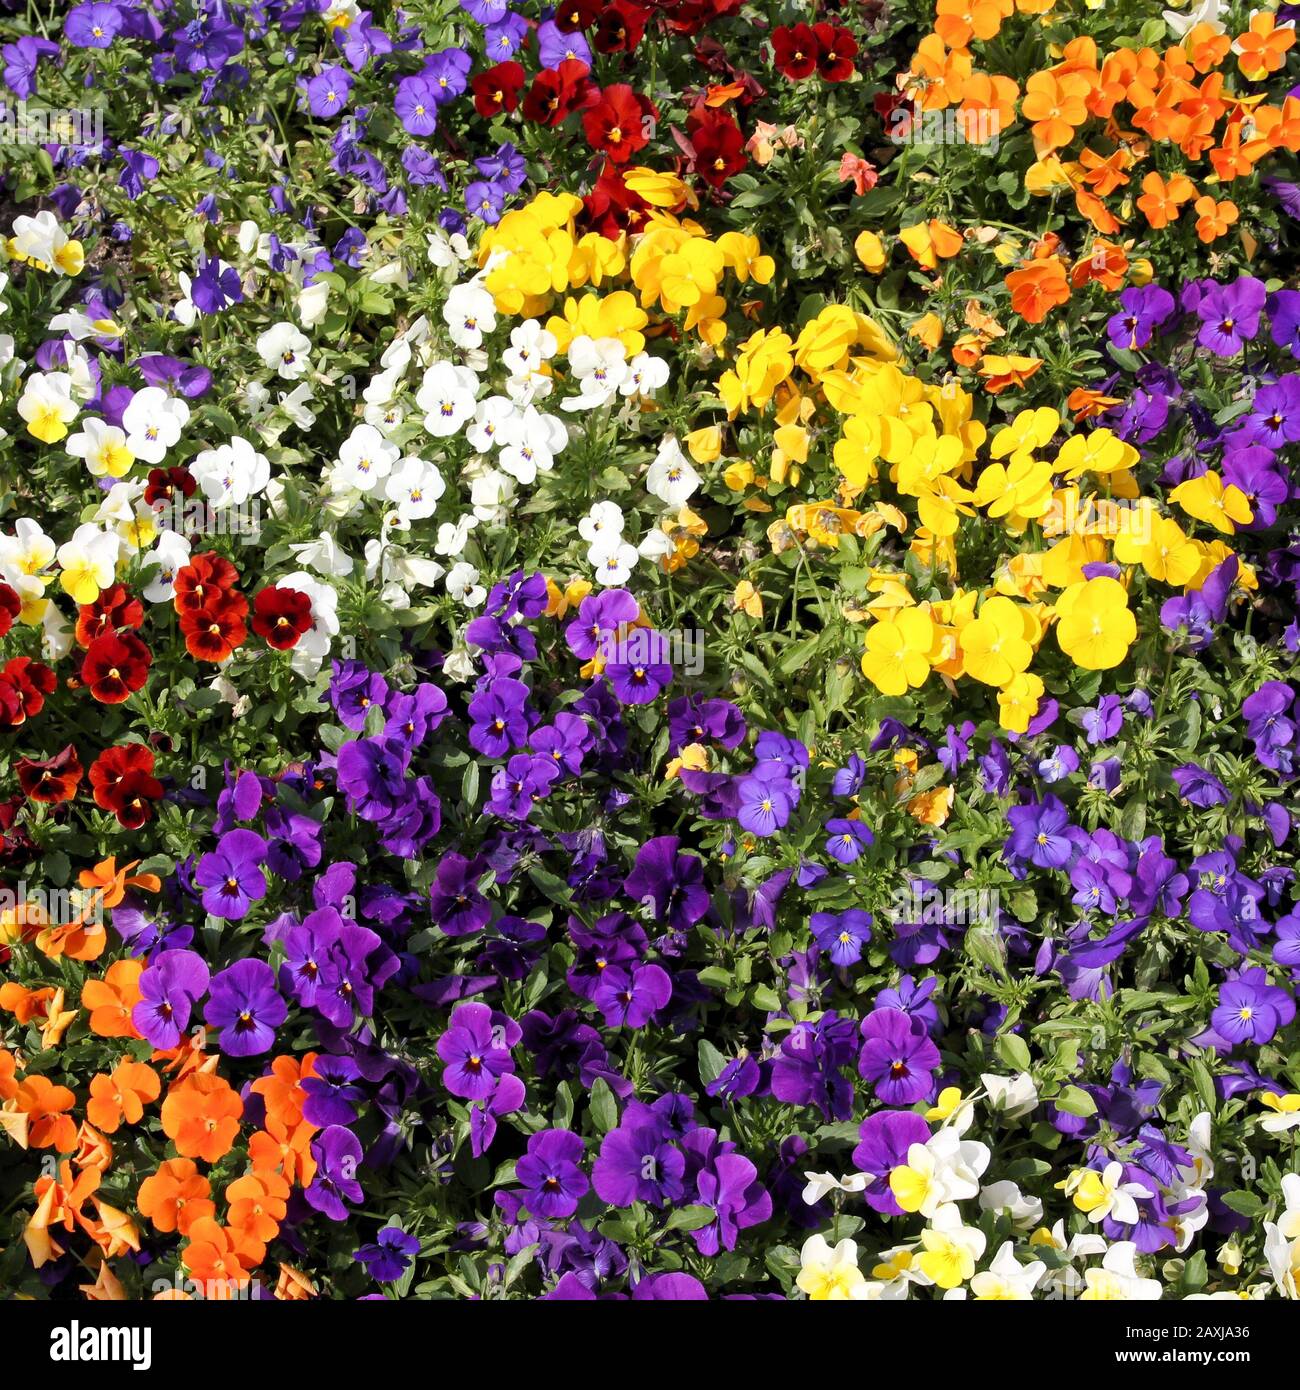 Colorful pansy flower background. Beautiful pansies in a flower bed. Square composition. Stock Photo